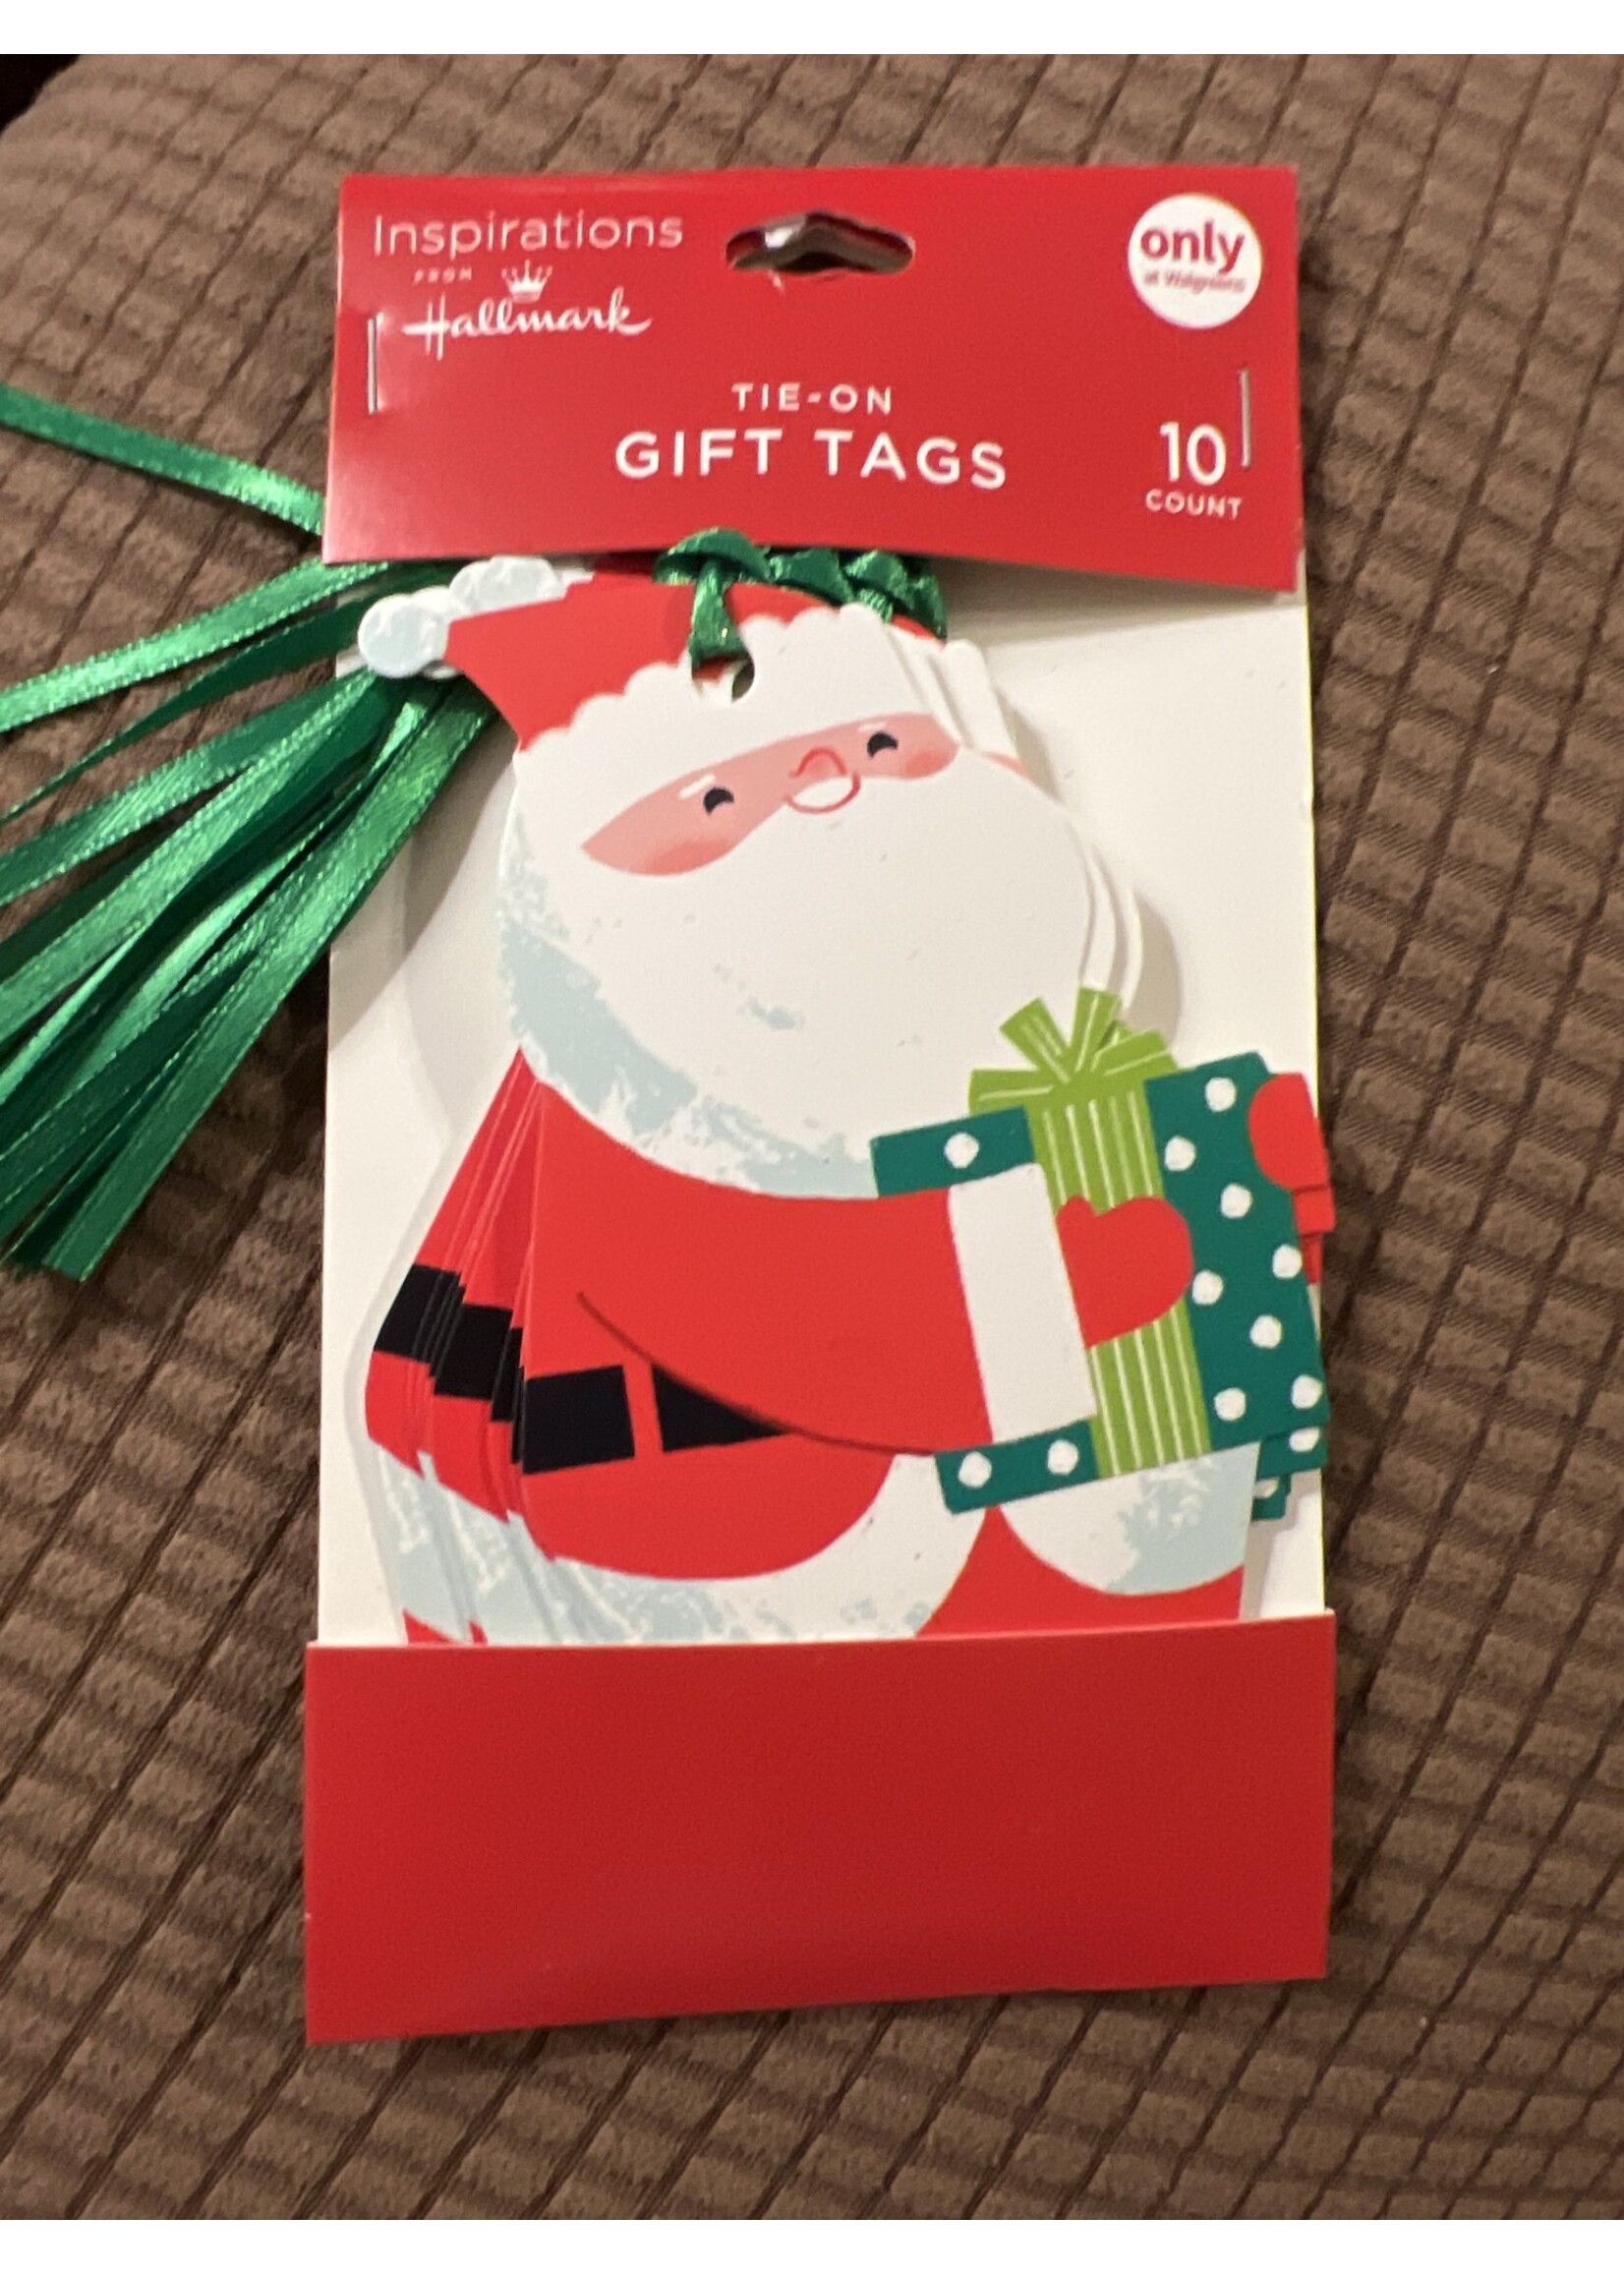 Inspirations by Hallmark- Santa Tie-On Gift Tags 10ct